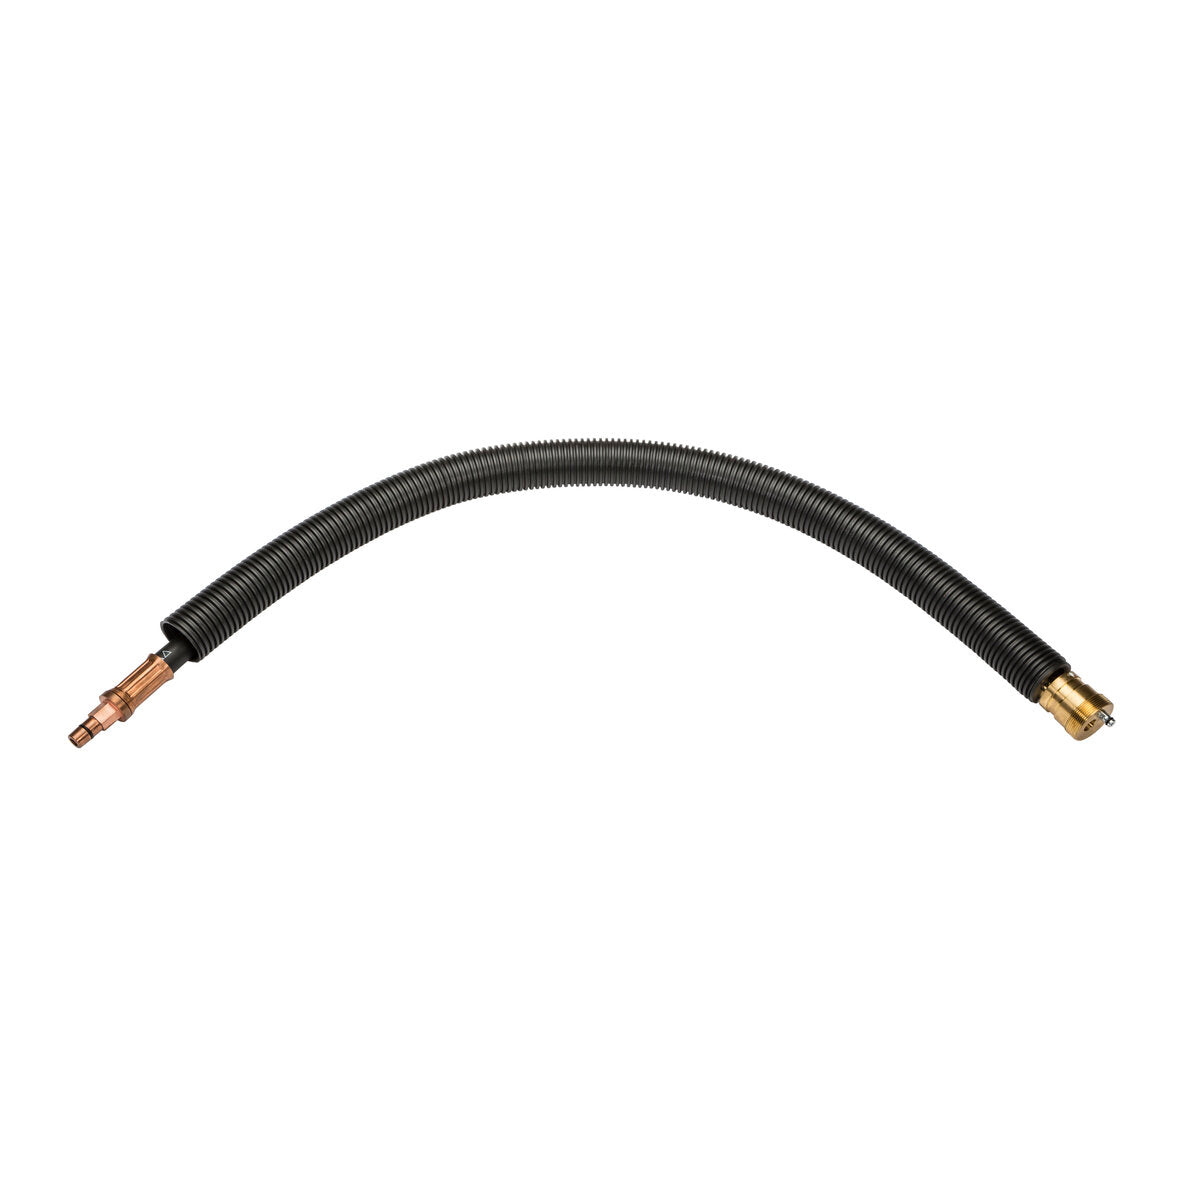 Lincoln Electric - AutoDrive® S Cable ABB 1600ID - KP4305-1600ID